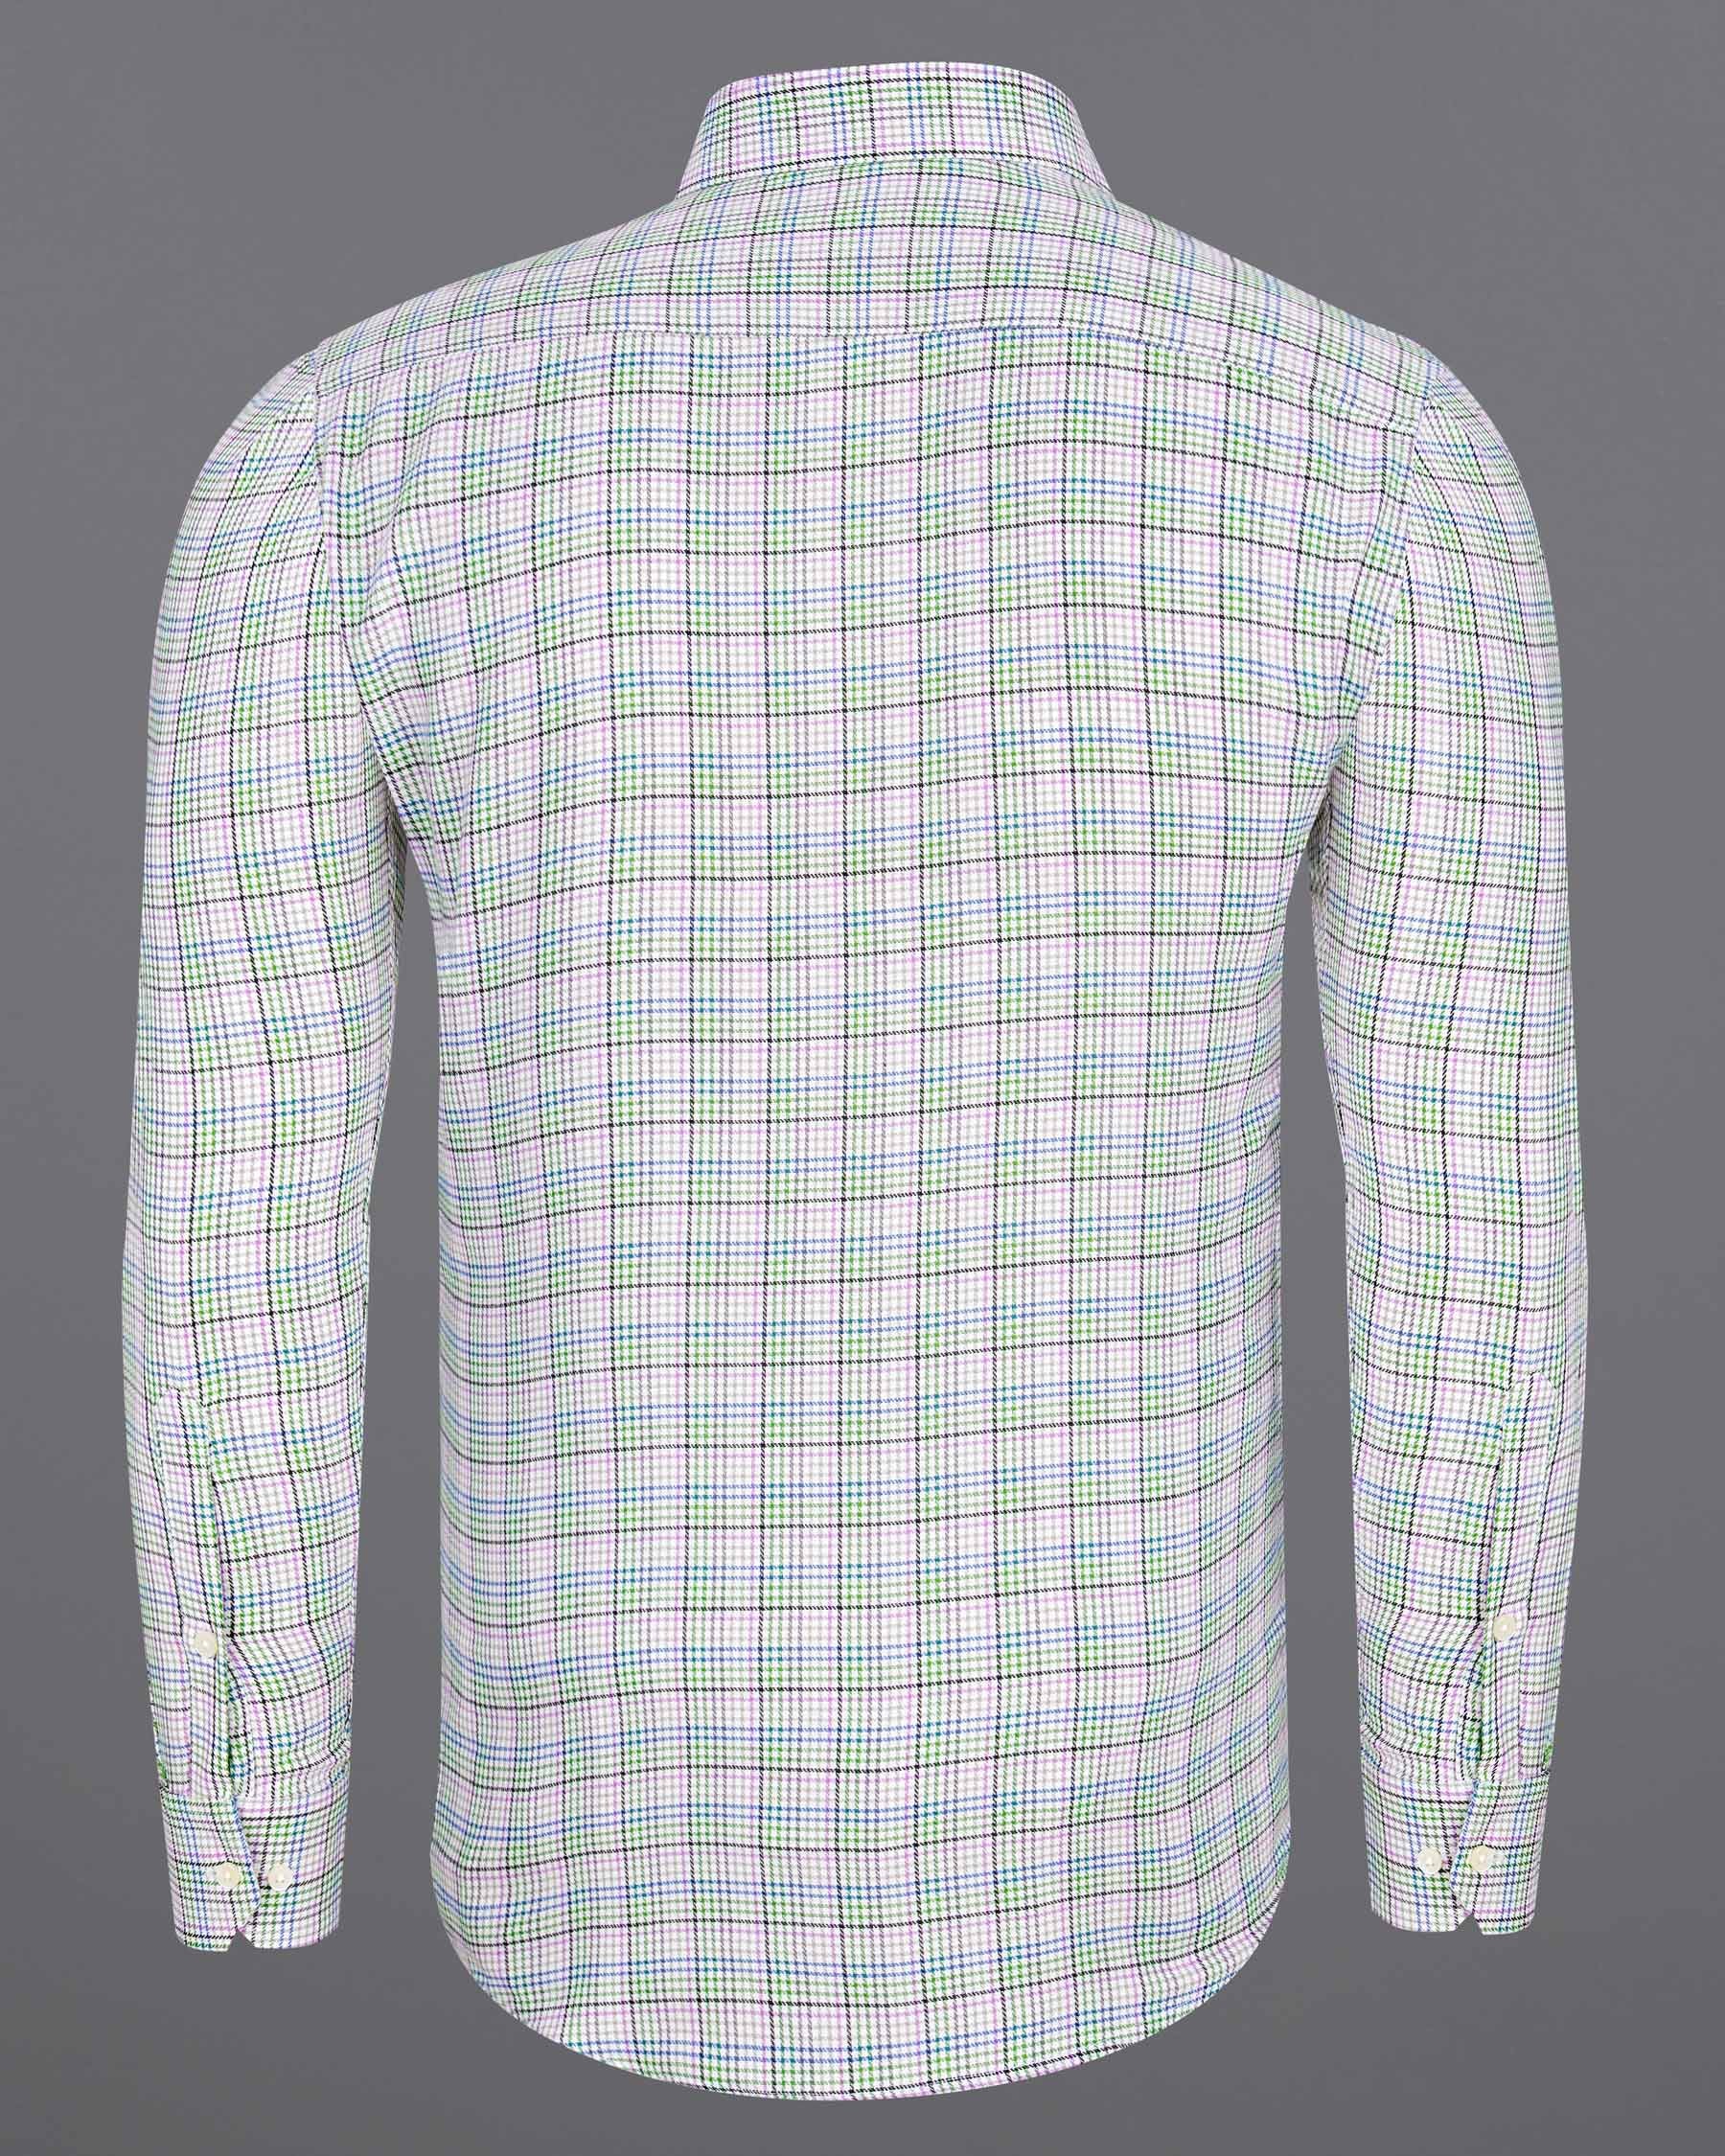 Mantis Green and White with Multi colored Plaid Twill Premium Cotton Shirt 7721-38,7721-38,7721-39,7721-39,7721-40,7721-40,7721-42,7721-42,7721-44,7721-44,7721-46,7721-46,7721-48,7721-48,7721-50,7721-50,7721-52,7721-52